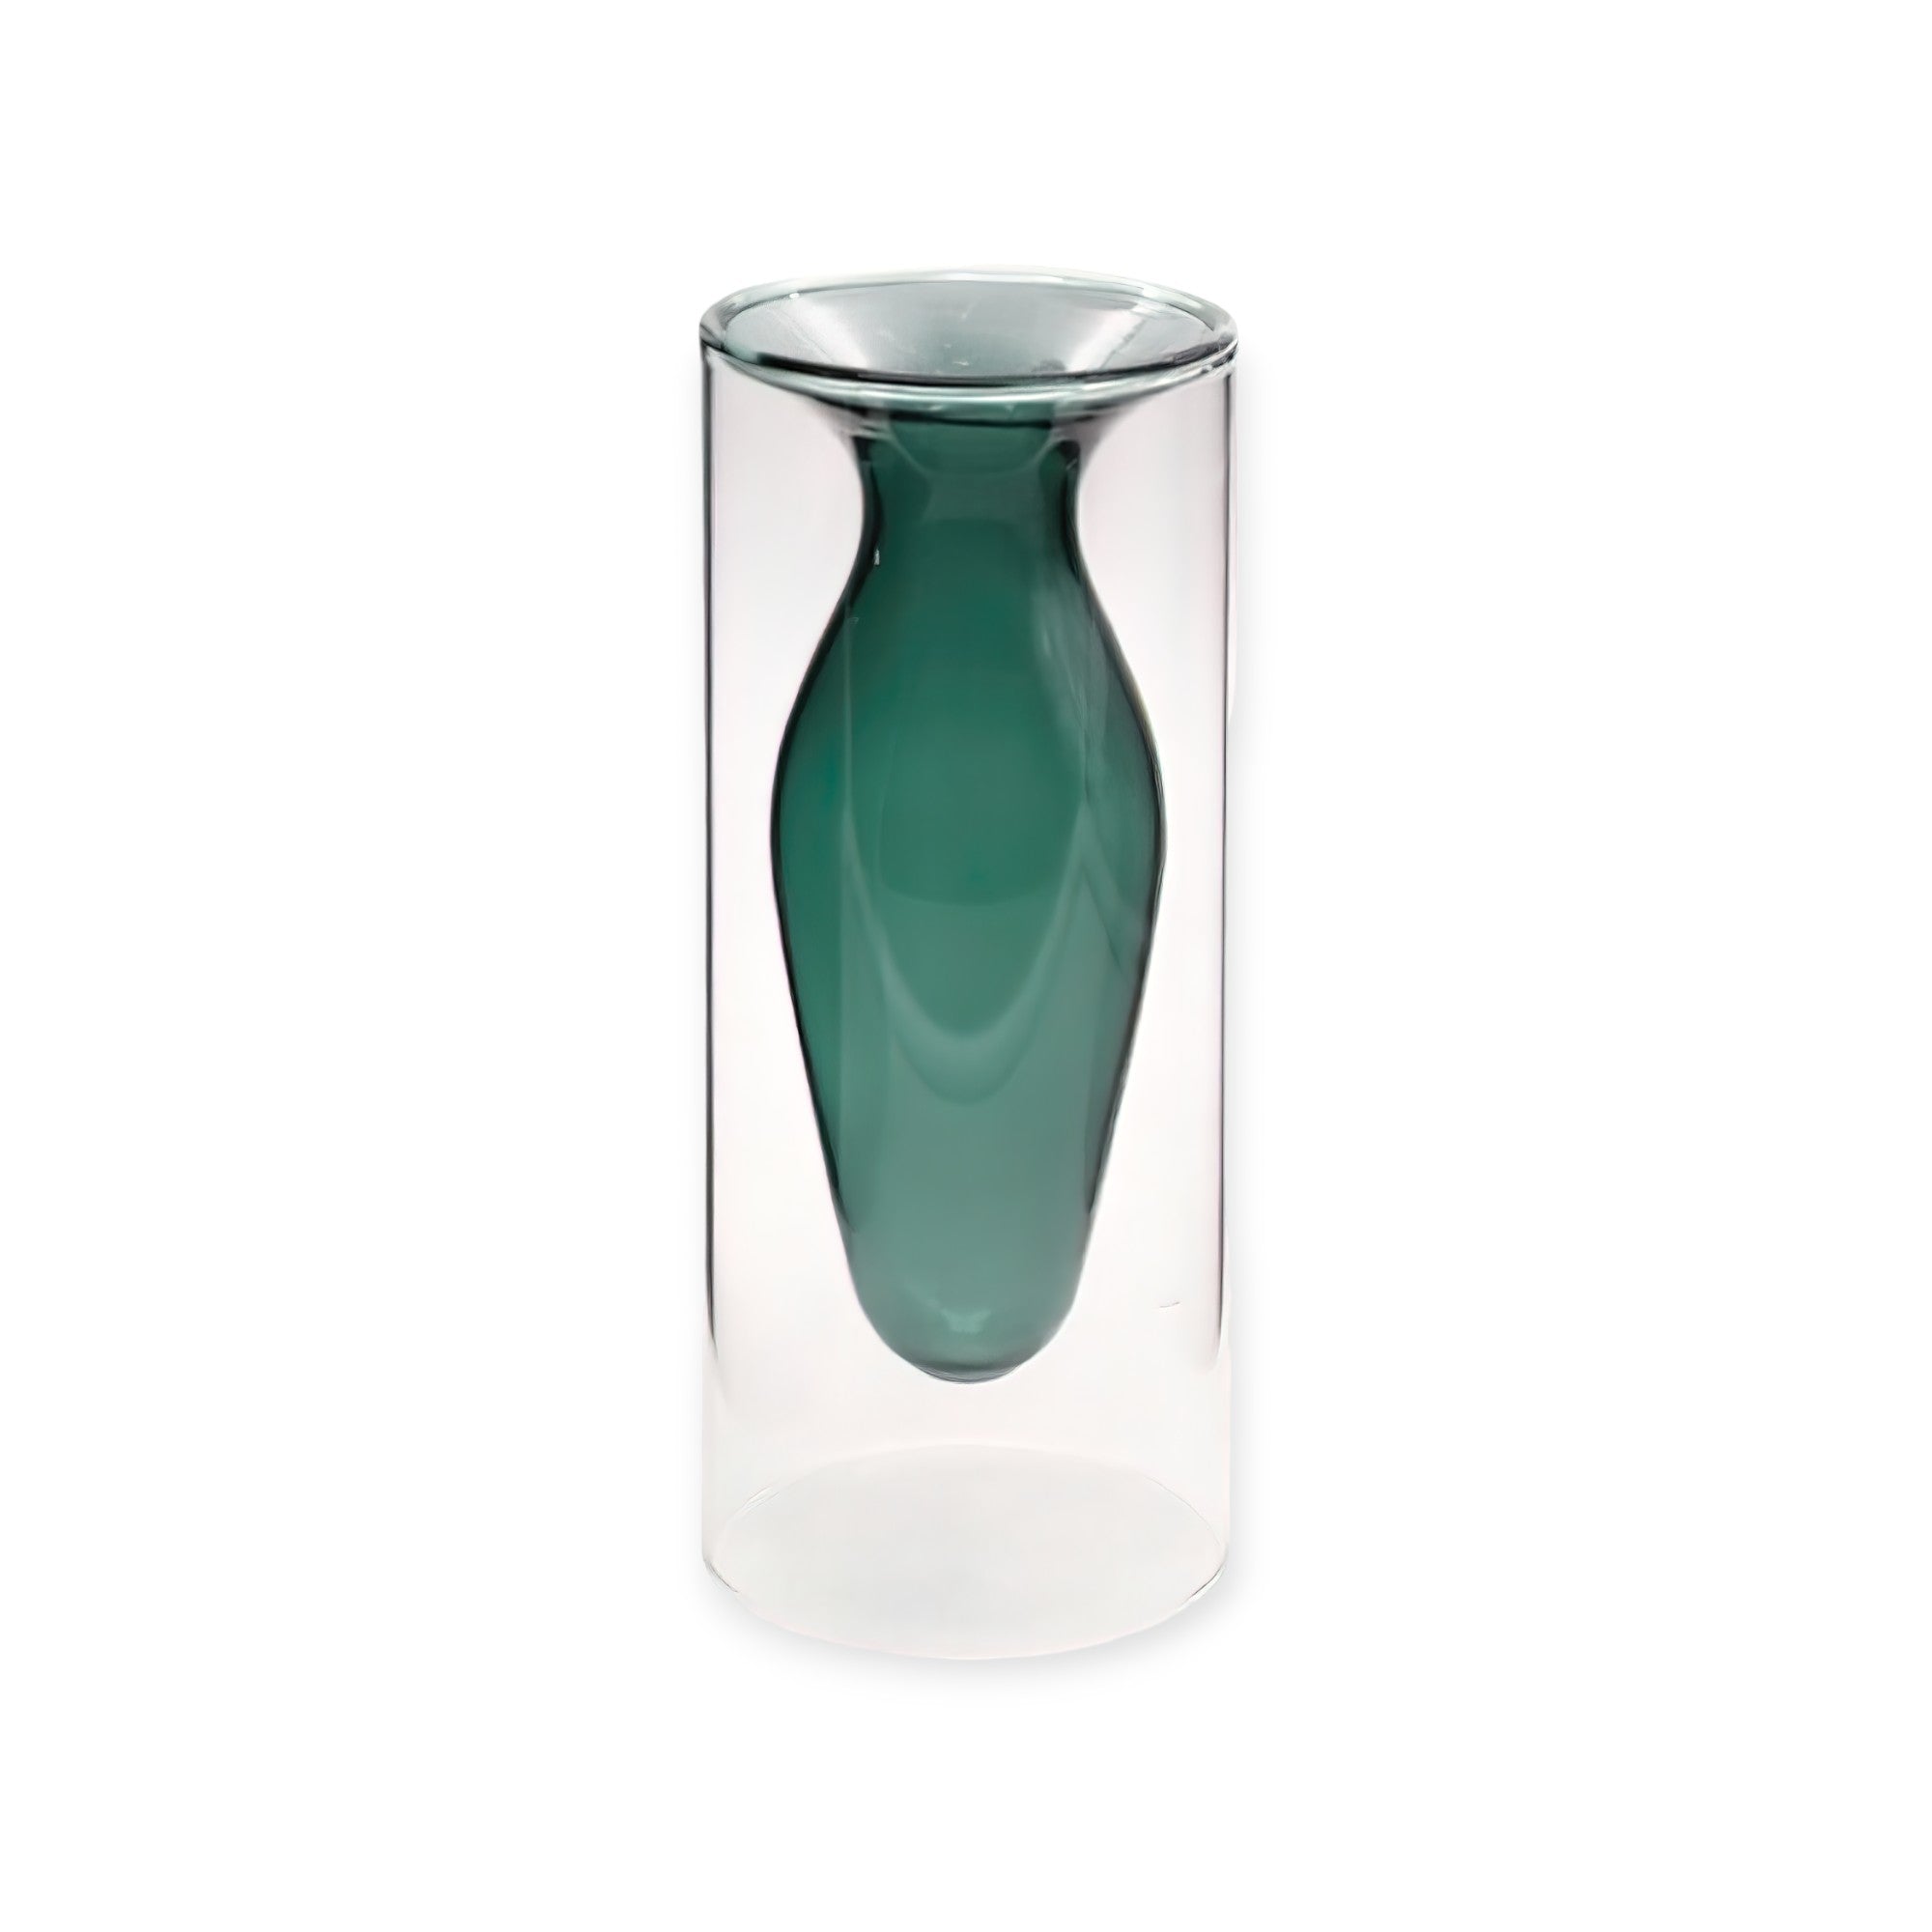 Whispering Hues Glass Vase Collection: Serenity in Every Curve